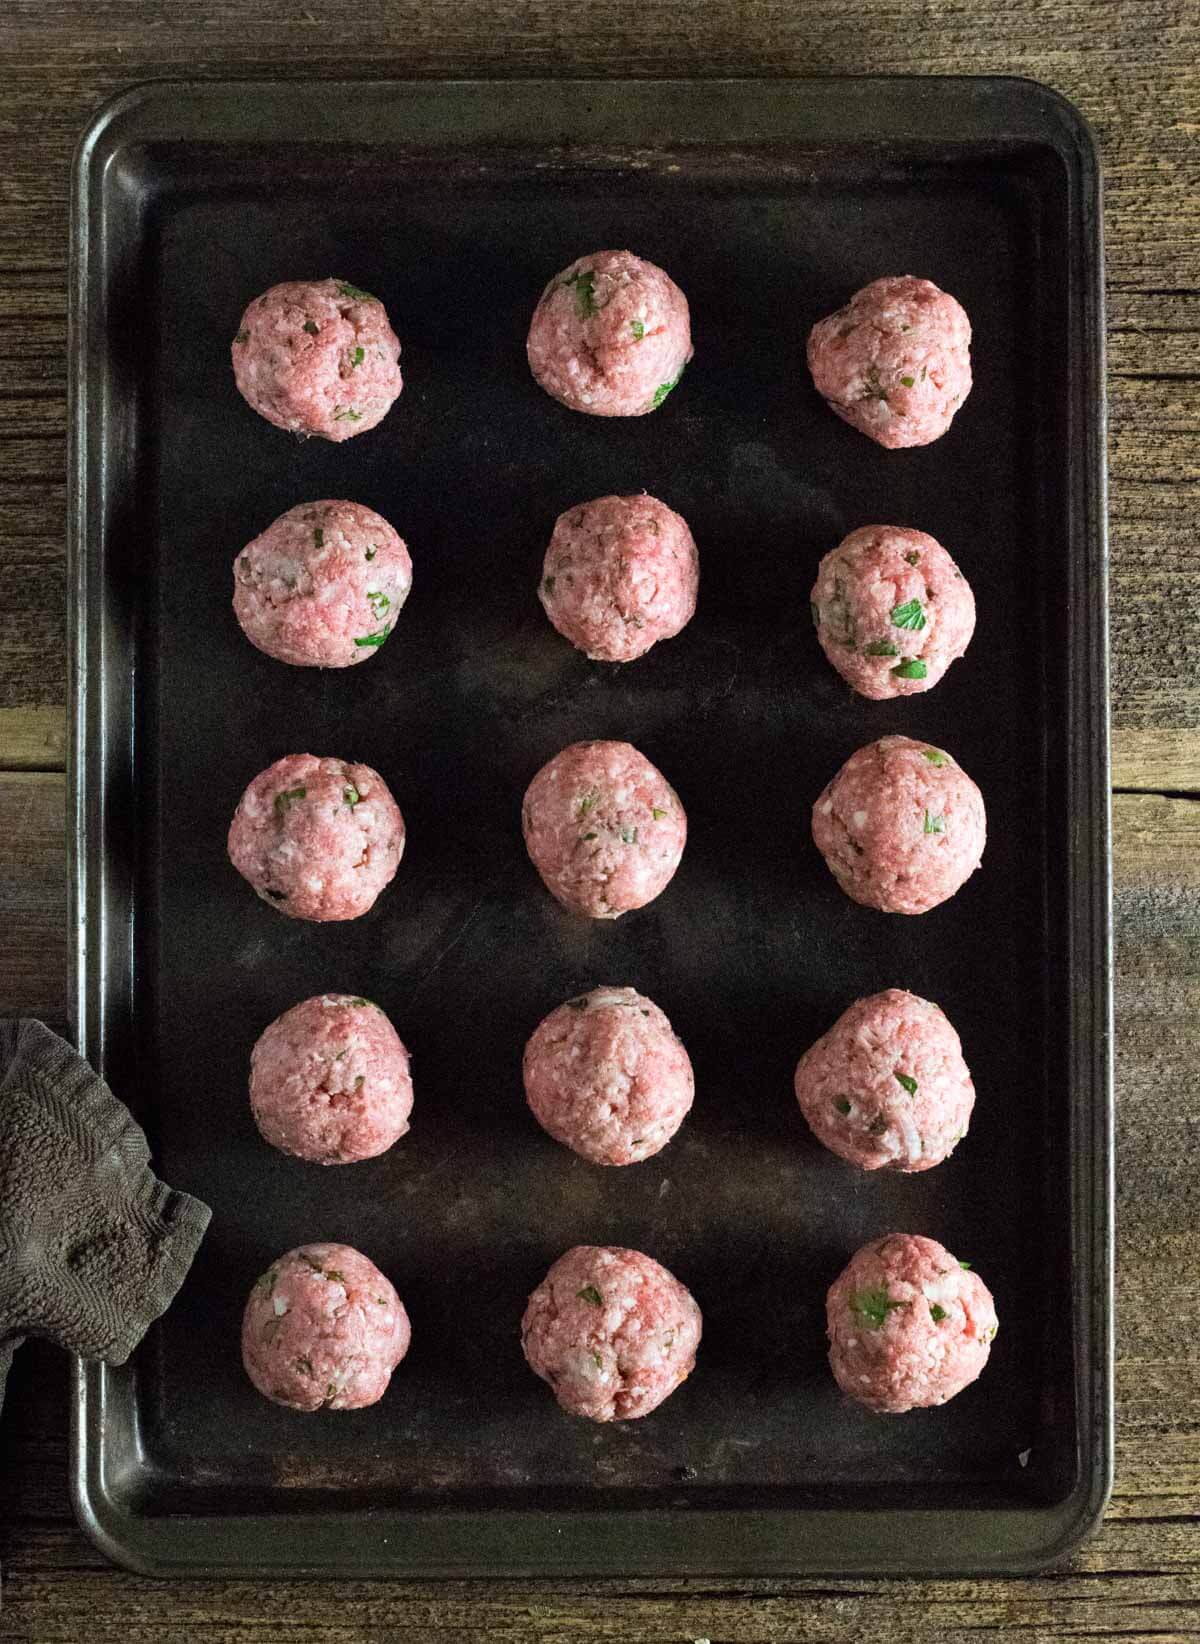 Forming raw meatballs without eggs.